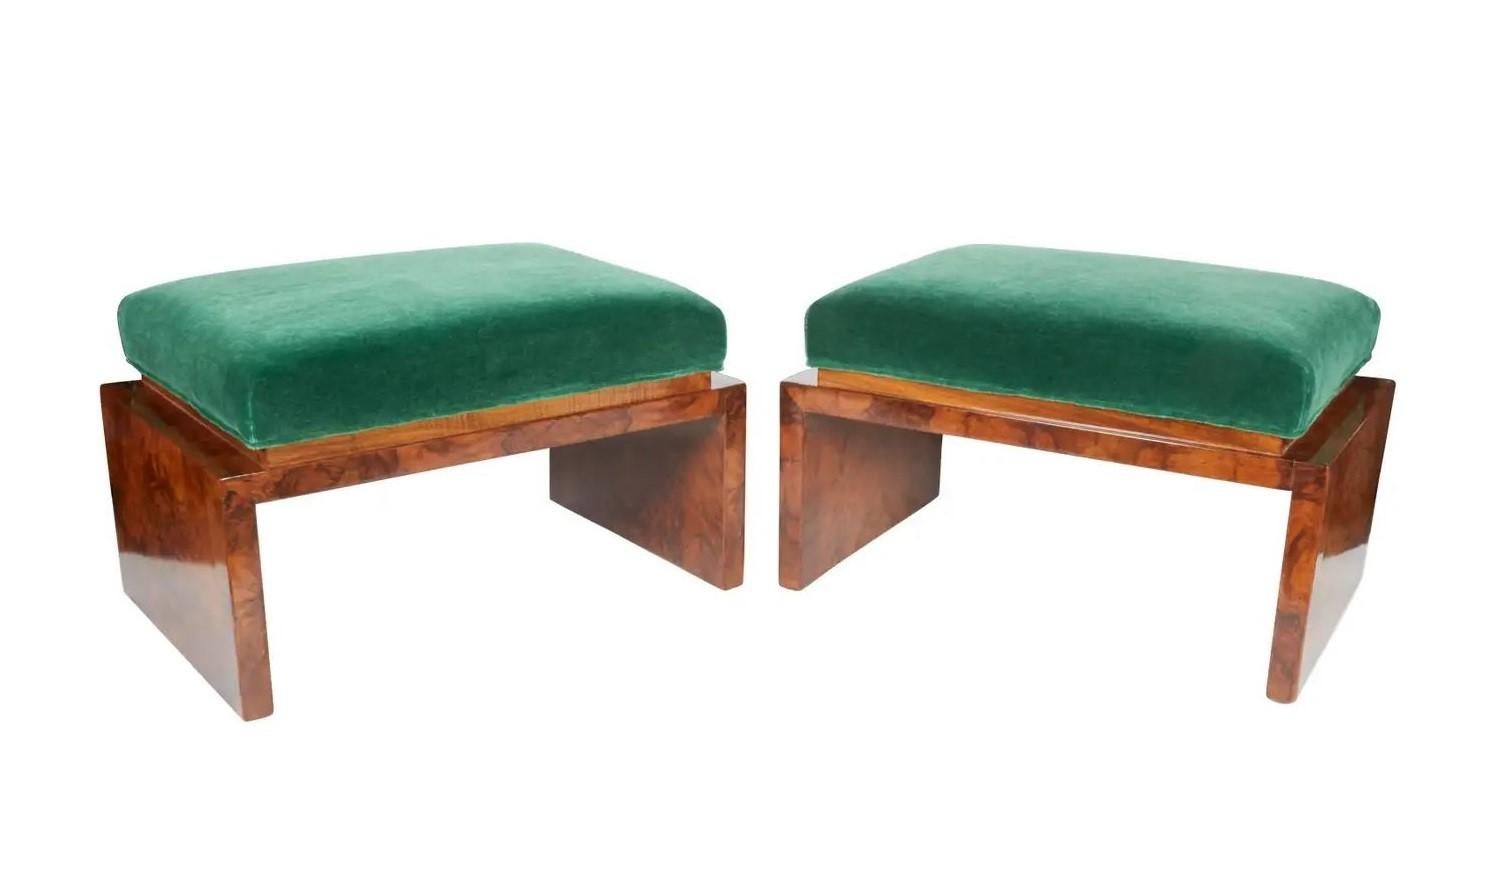 Eye-catching angles speak to the architectural inspiration behind these Art Deco benches, circa 1920's. Restored to mint condition, high quality workmanship. Each bench features a rectilinear streamline base design with well attenuated and elegant